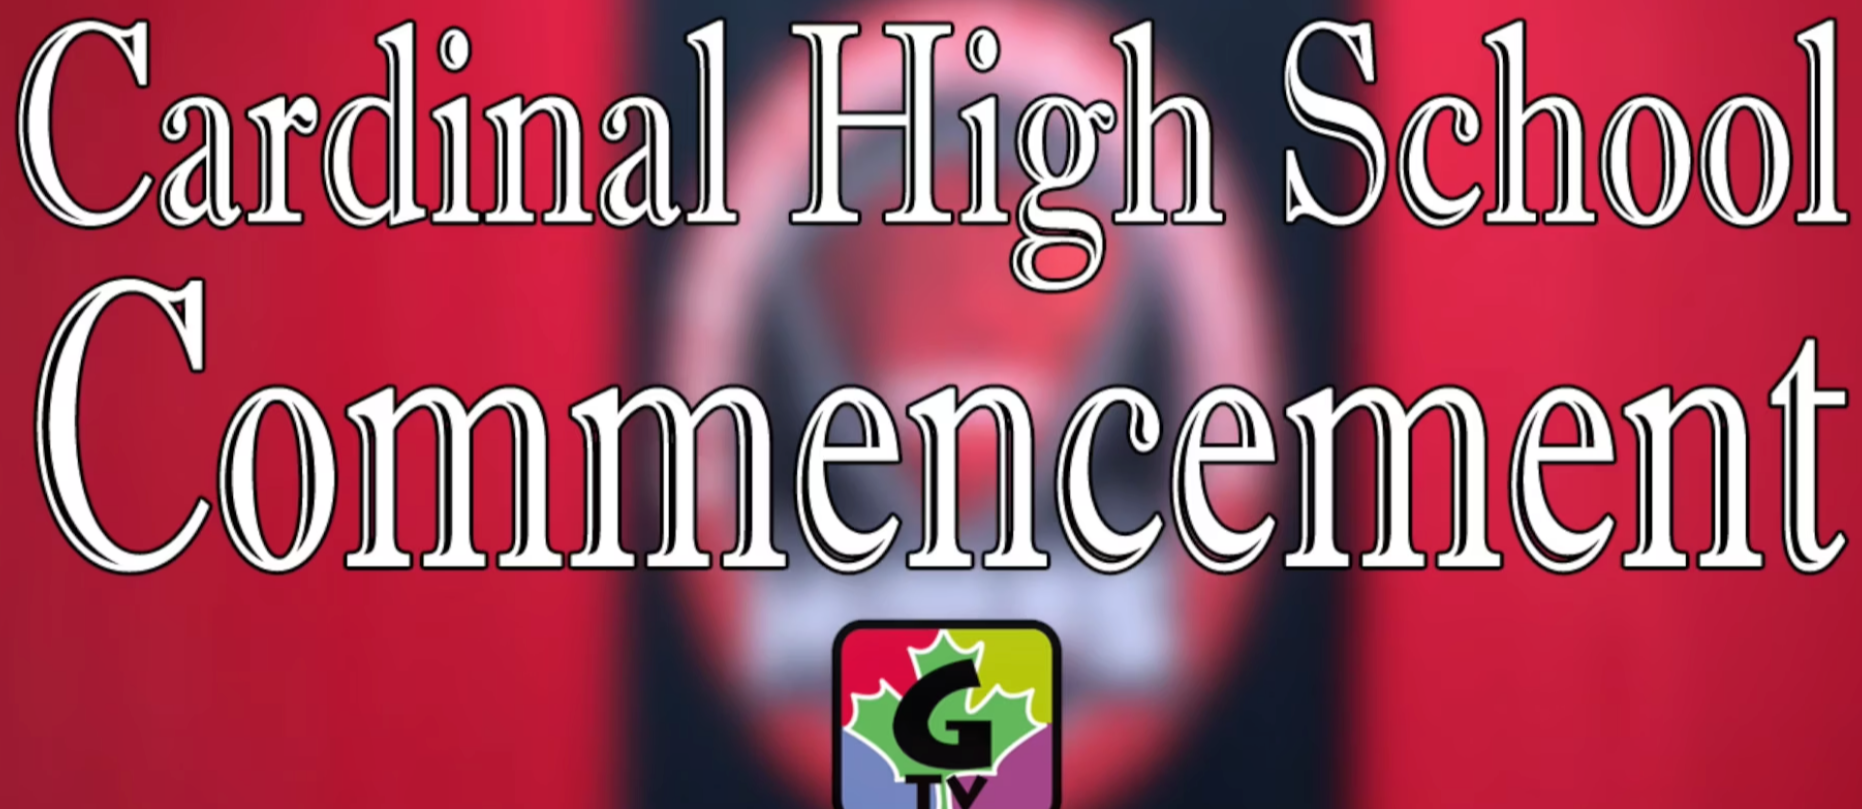 Here is the link to live stream for Saturday's Commencement. https://boxcast.tv/view/2024-cardinal-high-school-commencement-yrhaia015dq44spqwpkh